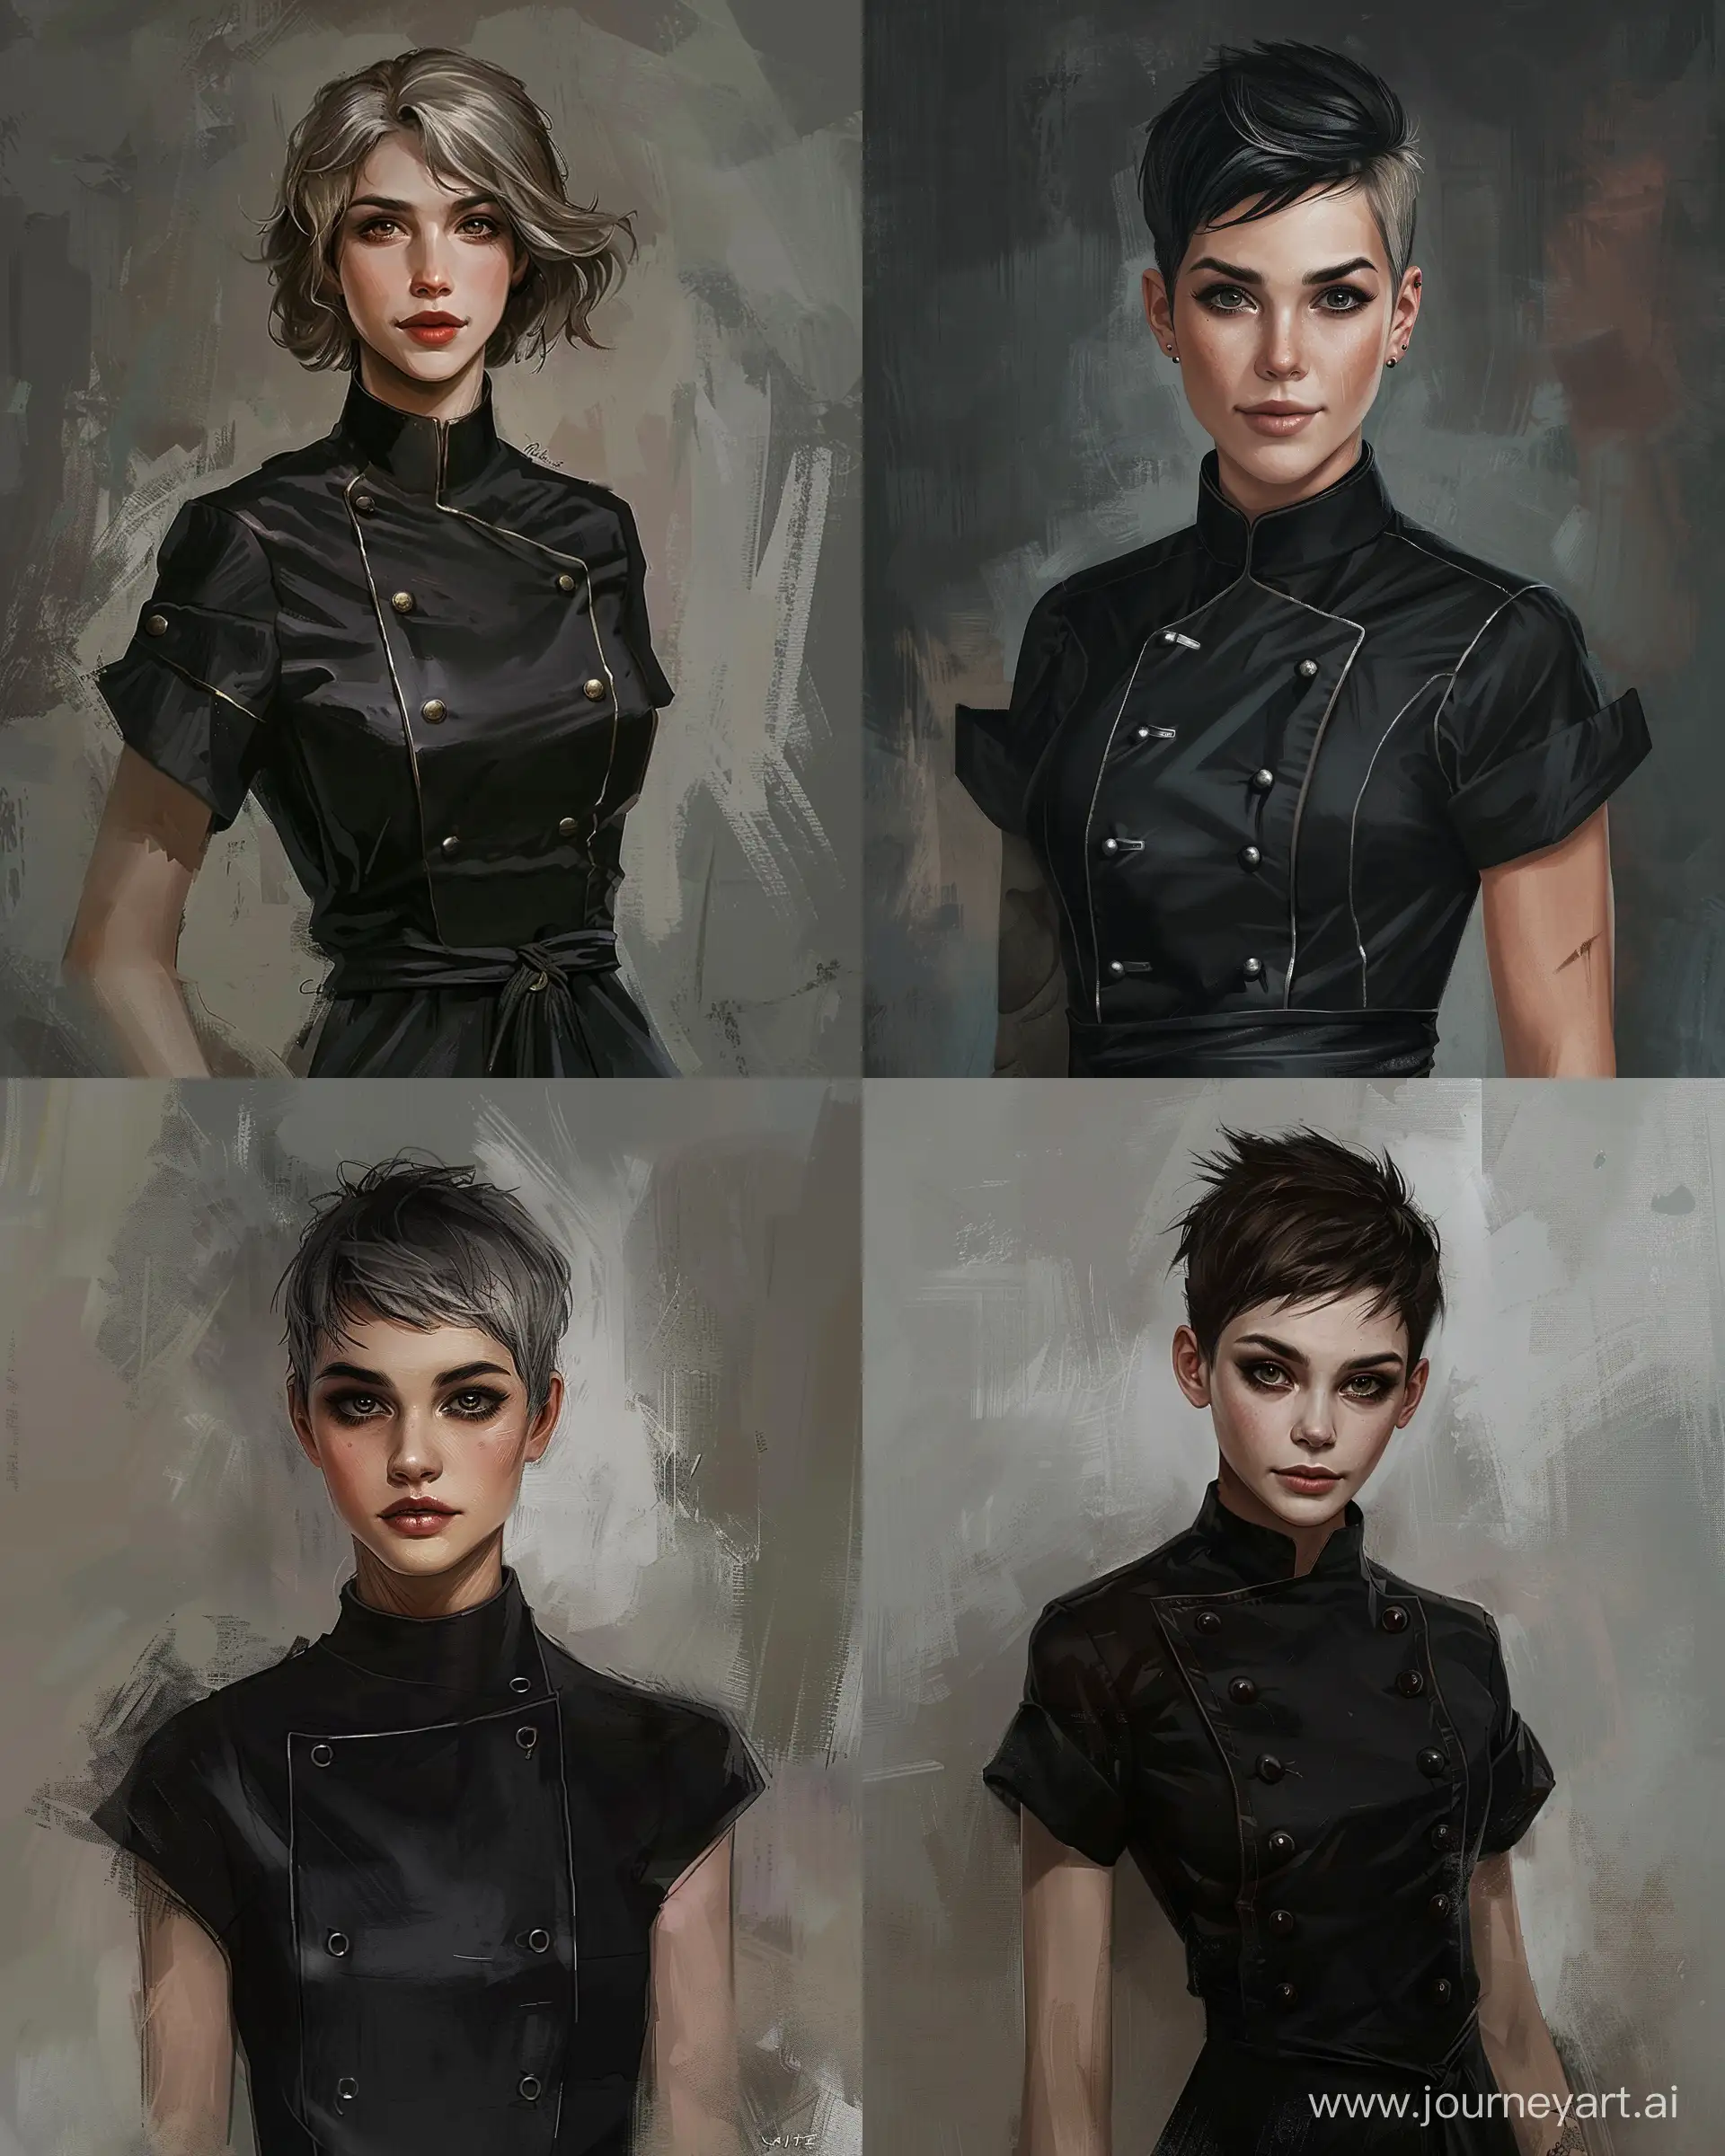 Futuristic-Chef-Portrait-Chuppy-Lady-with-Attractive-Short-Hairstyles